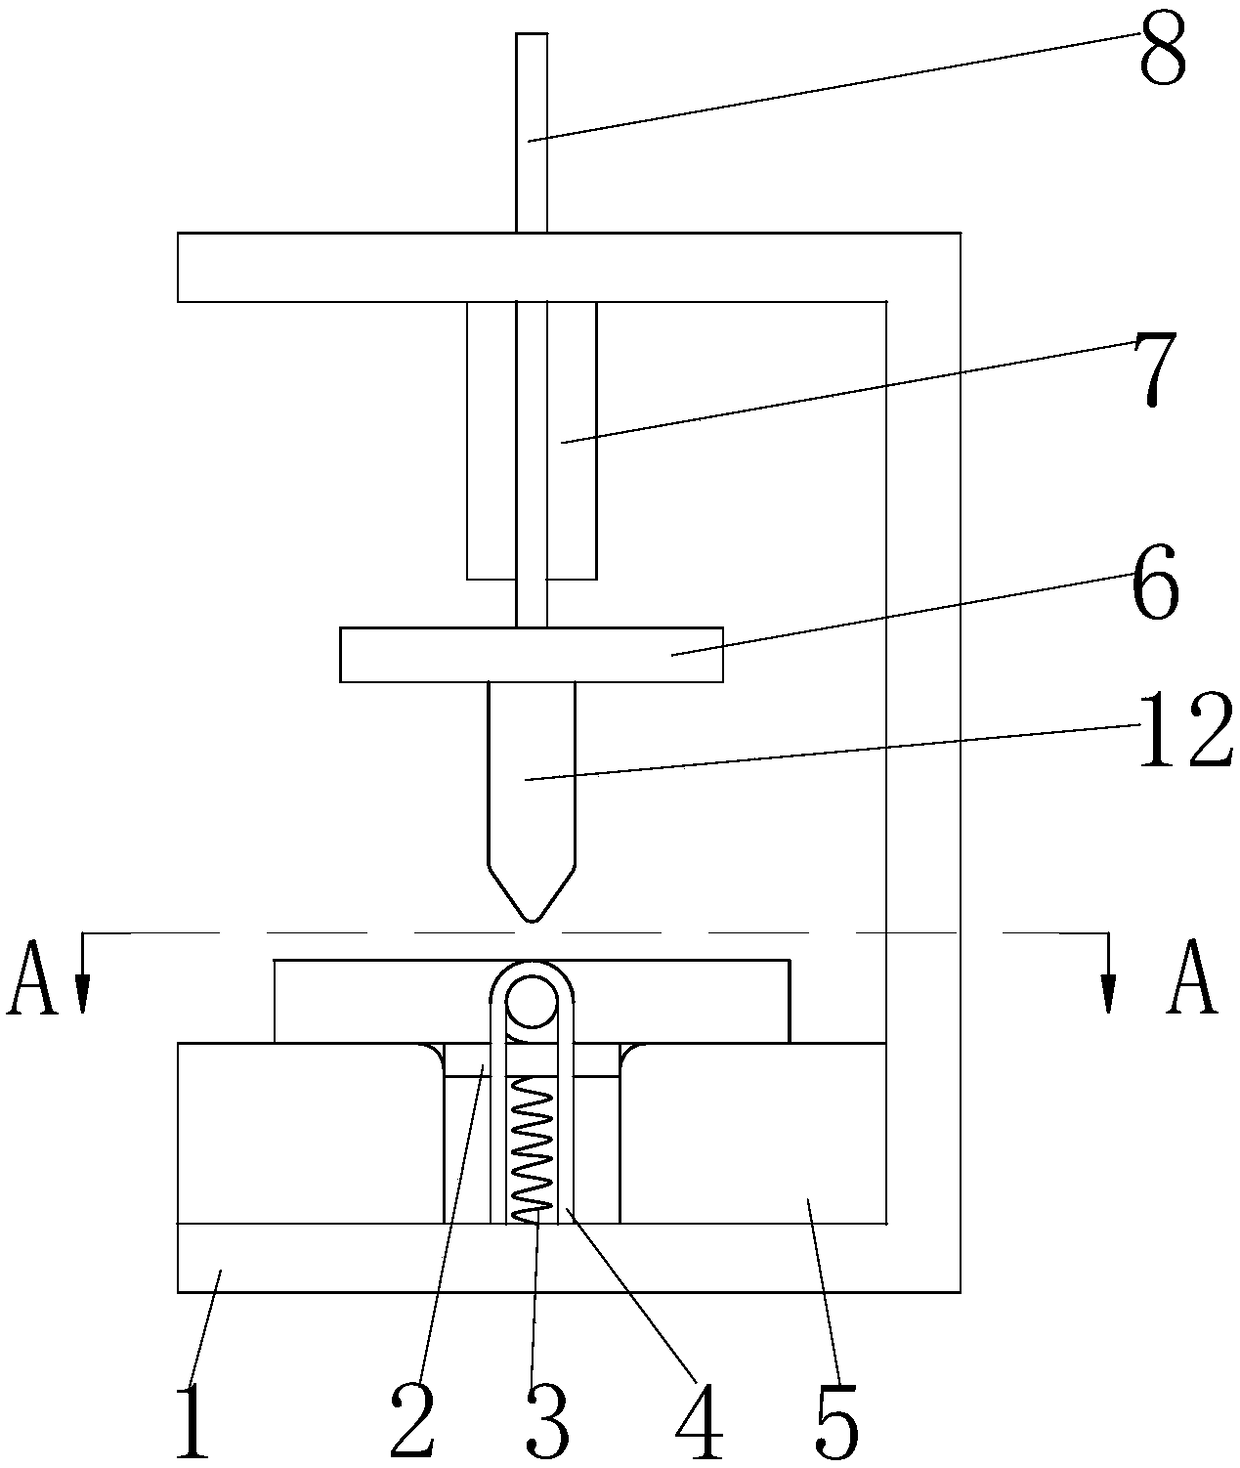 V-shaped sheet metal part punch forming device